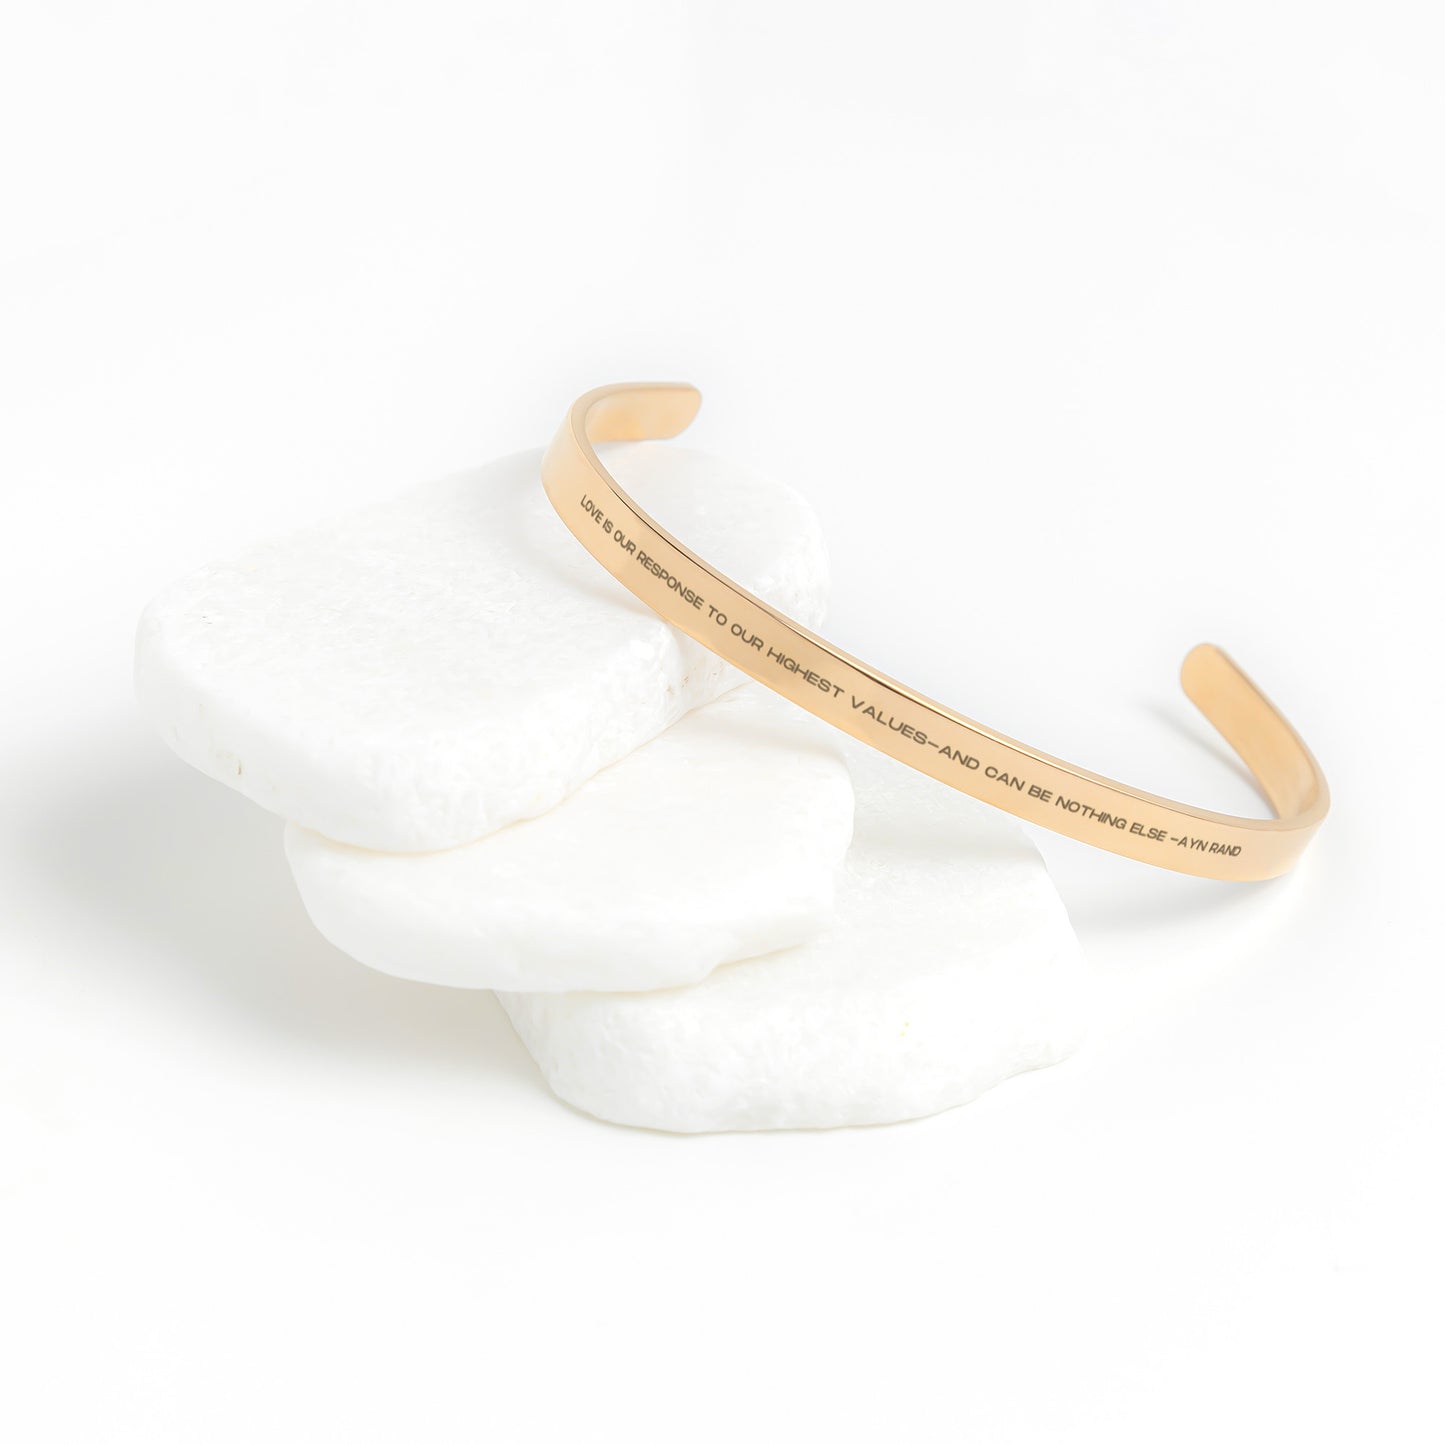 Love is Our Response Cuff Bracelet